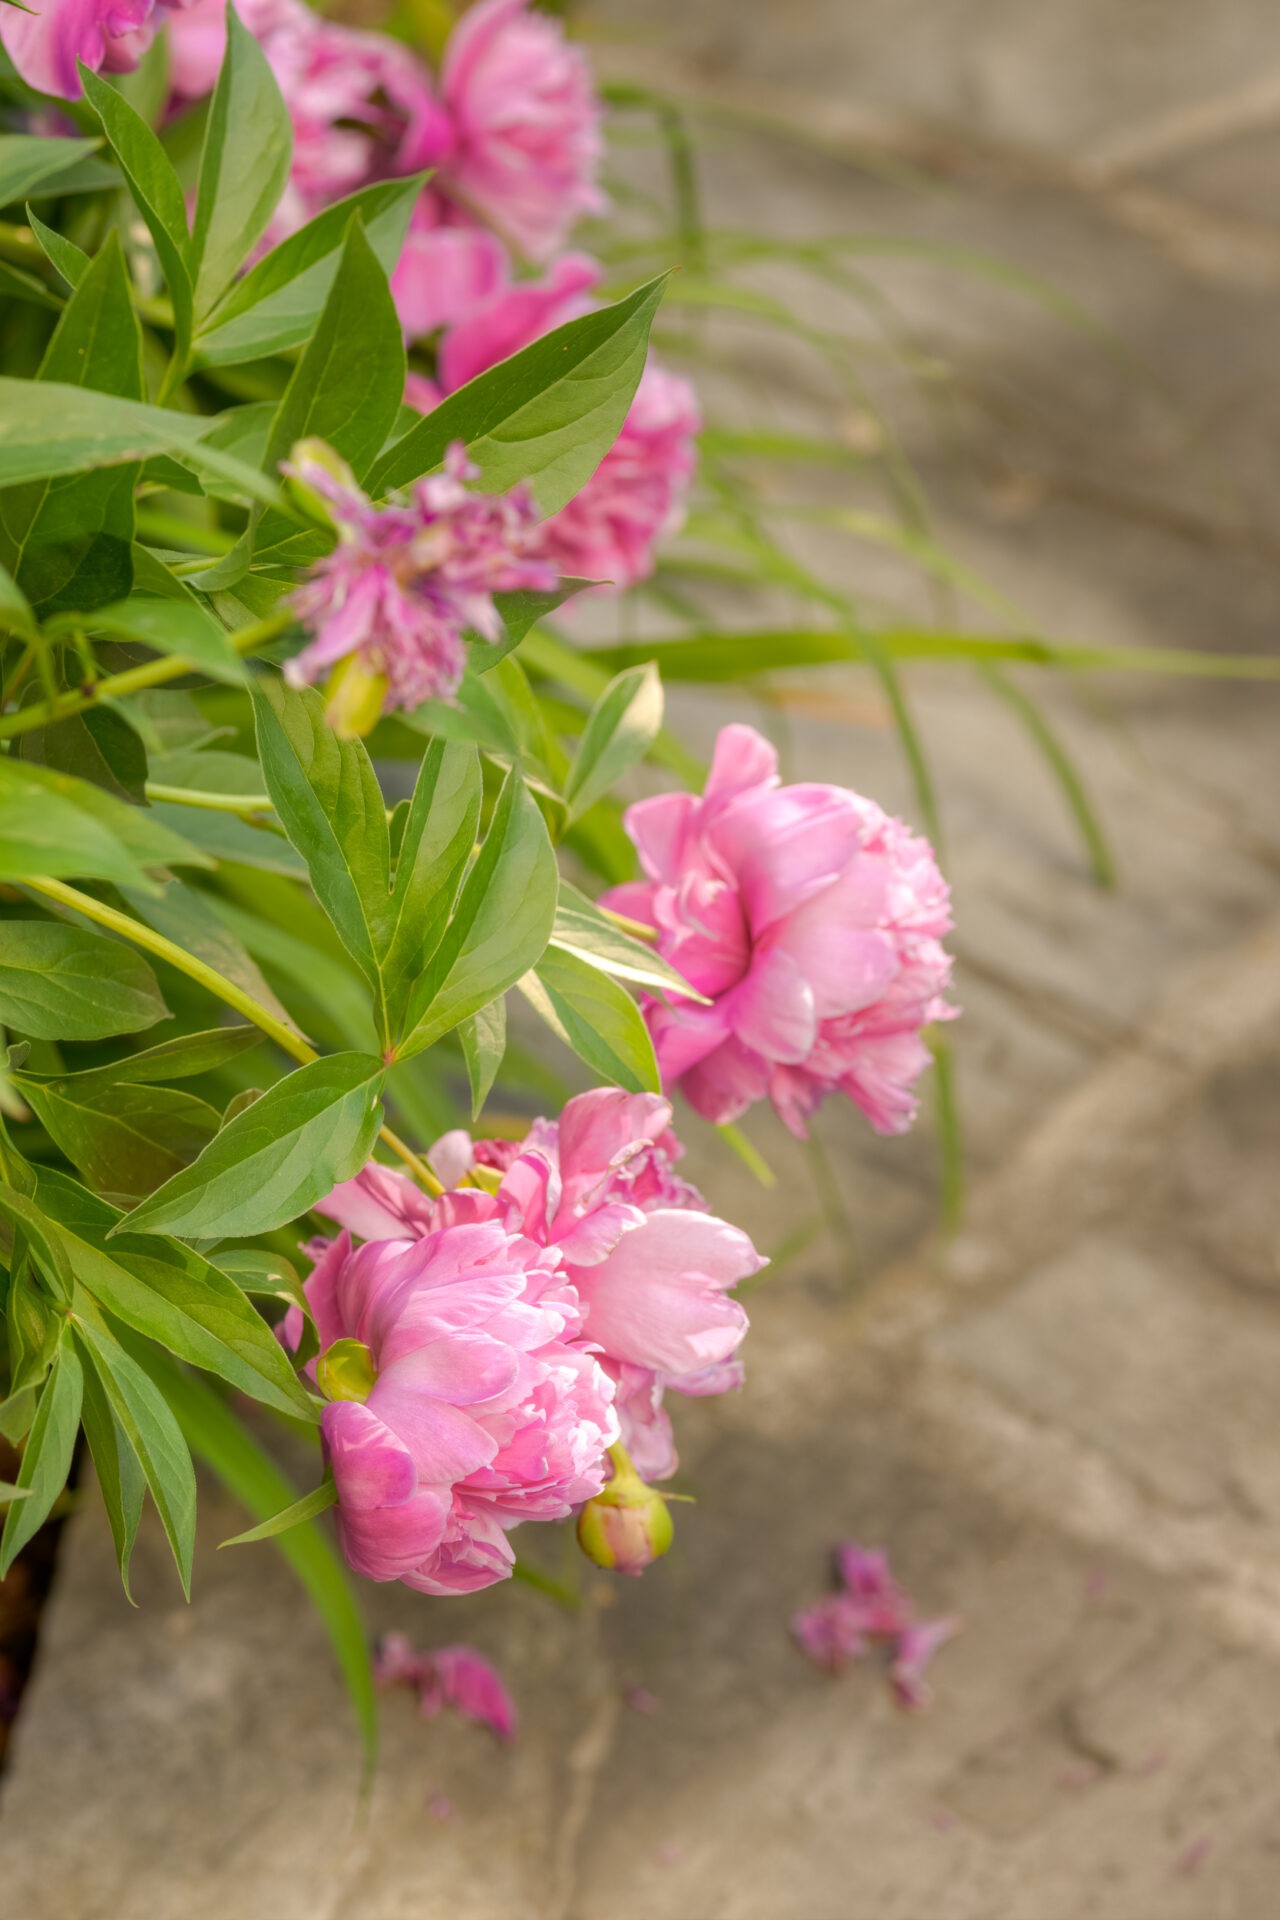 Bright pink peonies with lush green leaves are in bloom, some petals have fallen onto the grey stone ground below. The focus is soft and natural.